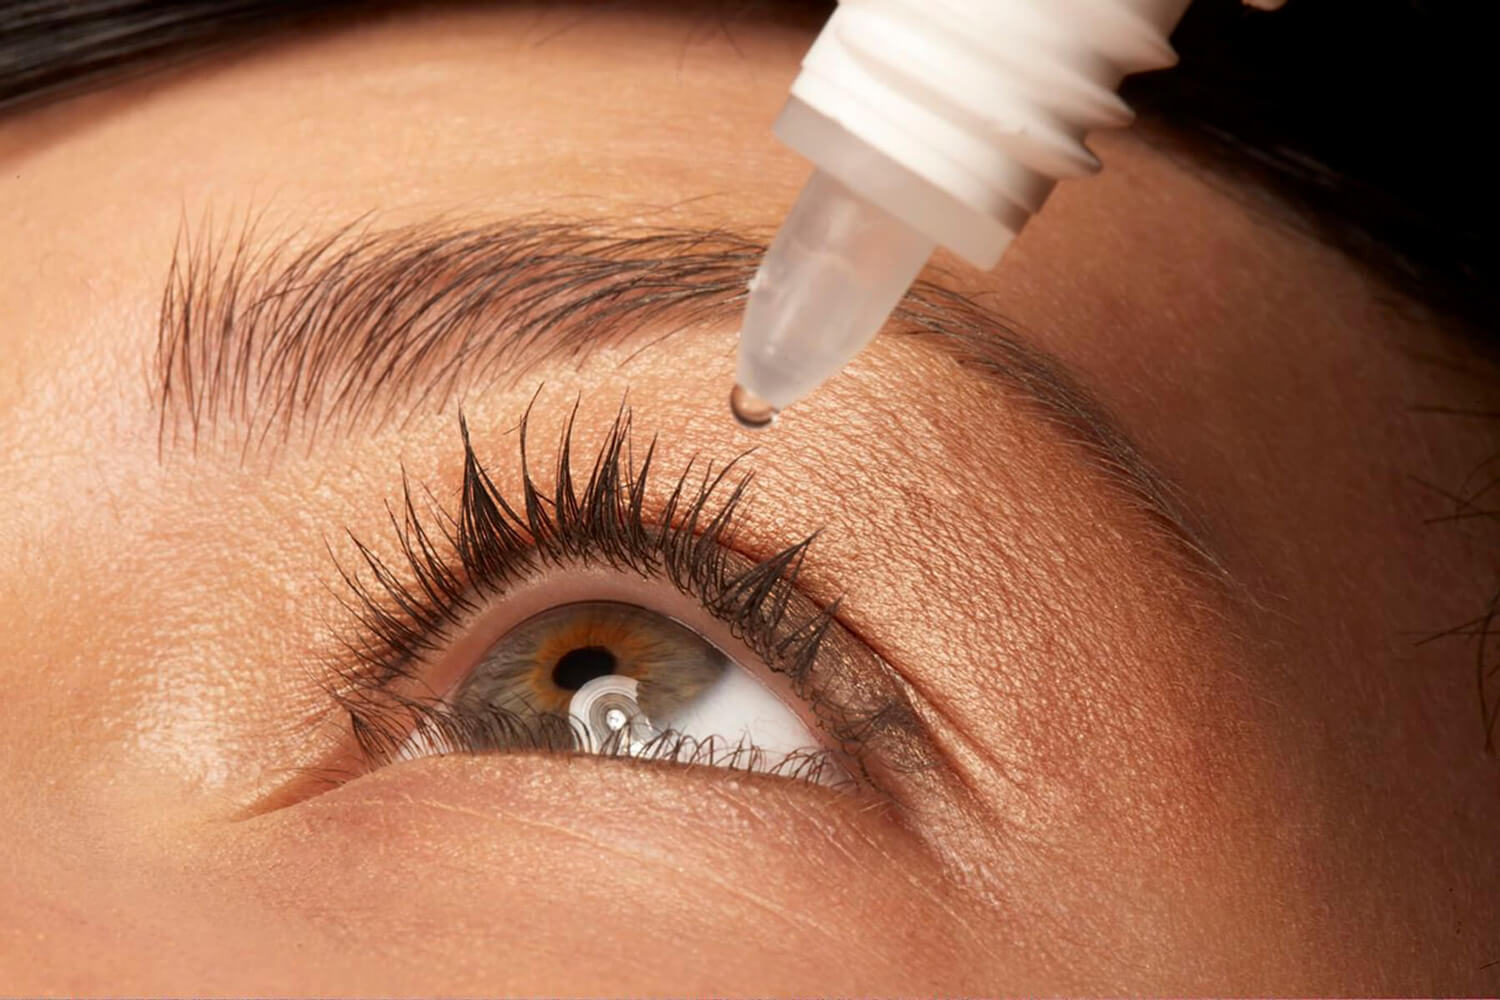 How to use eye drops: the dos and don'ts